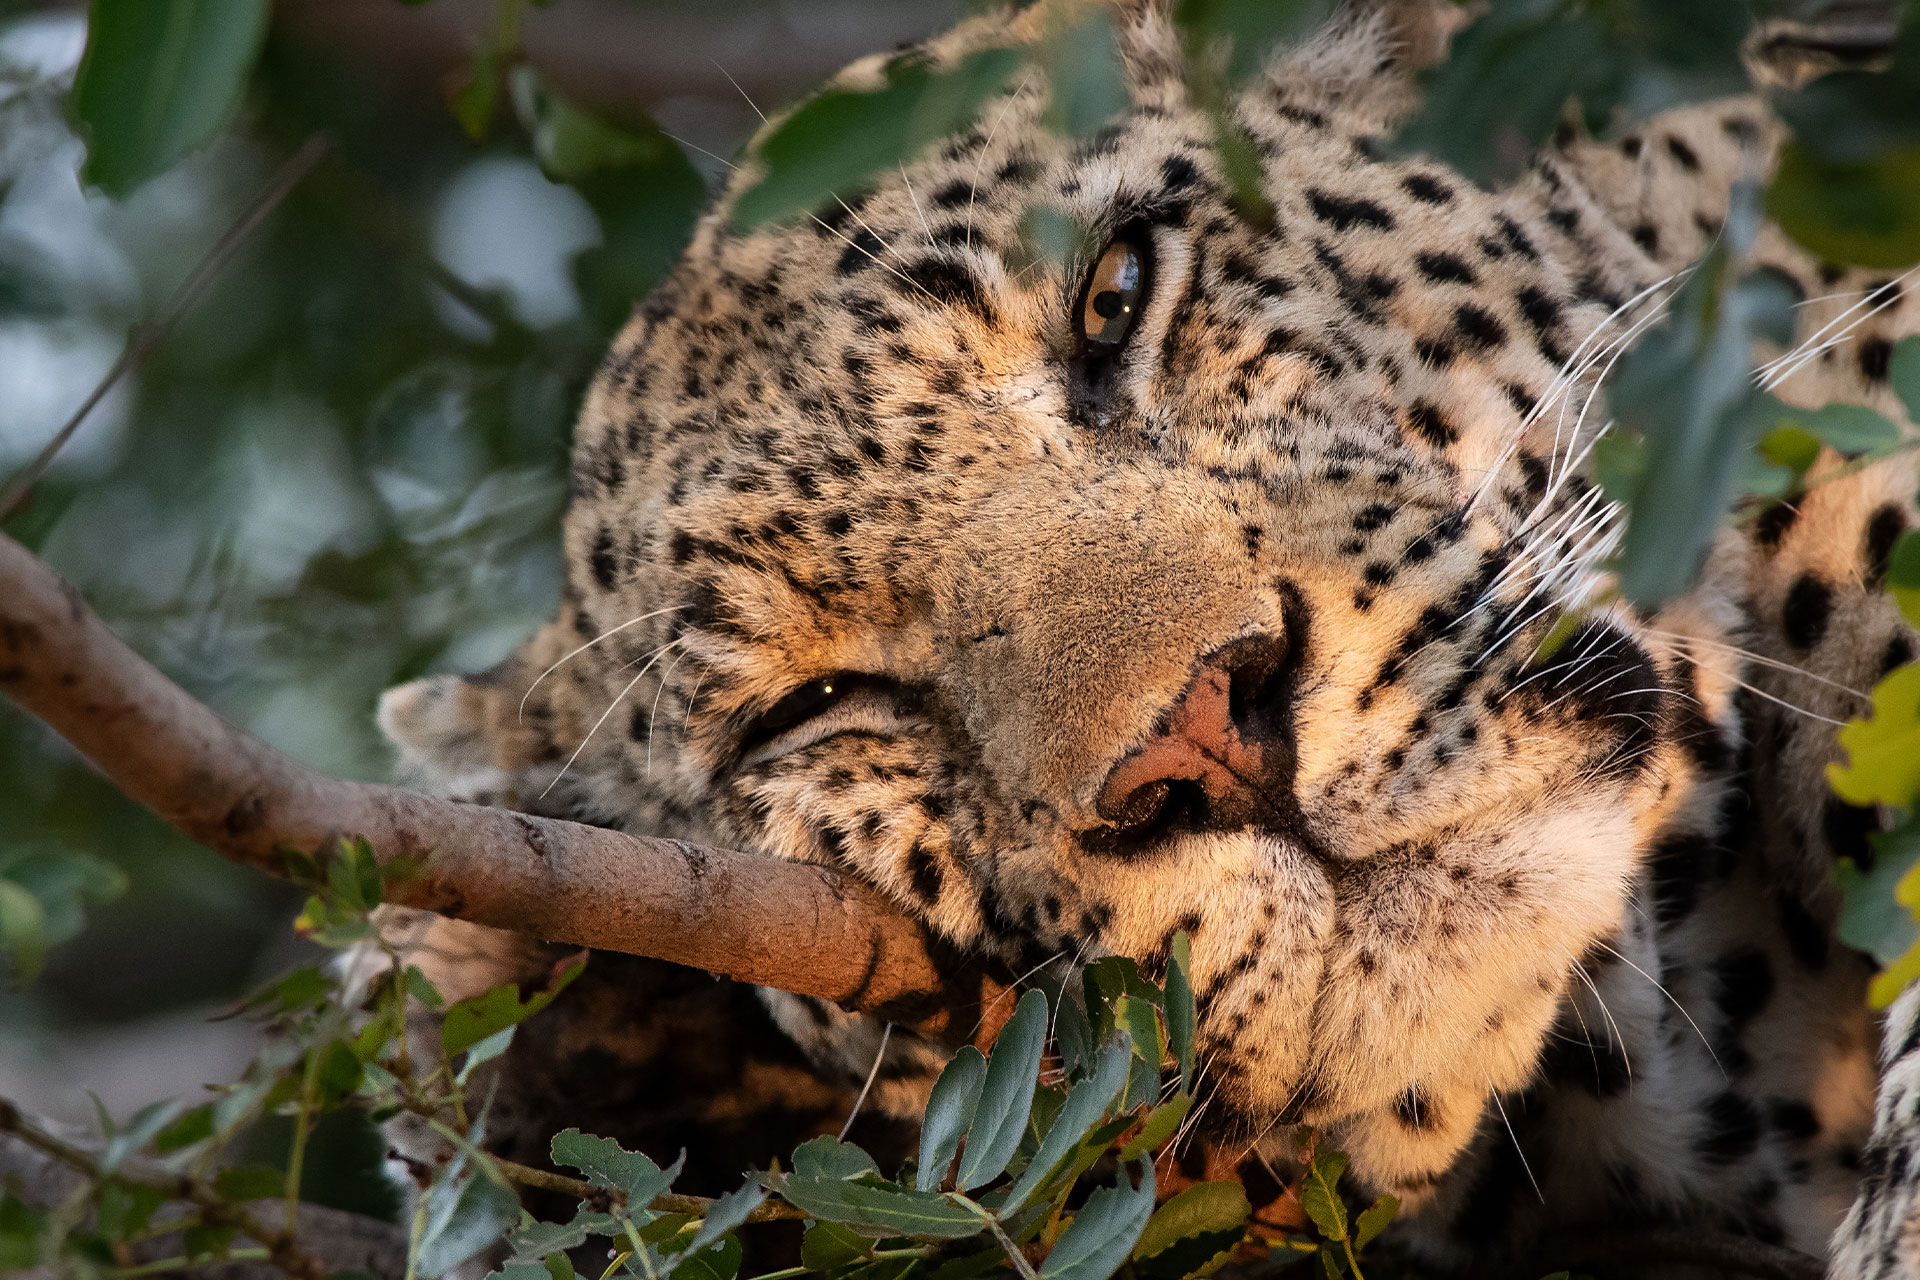 A leopard spotted in a tree during a safari in Africa.